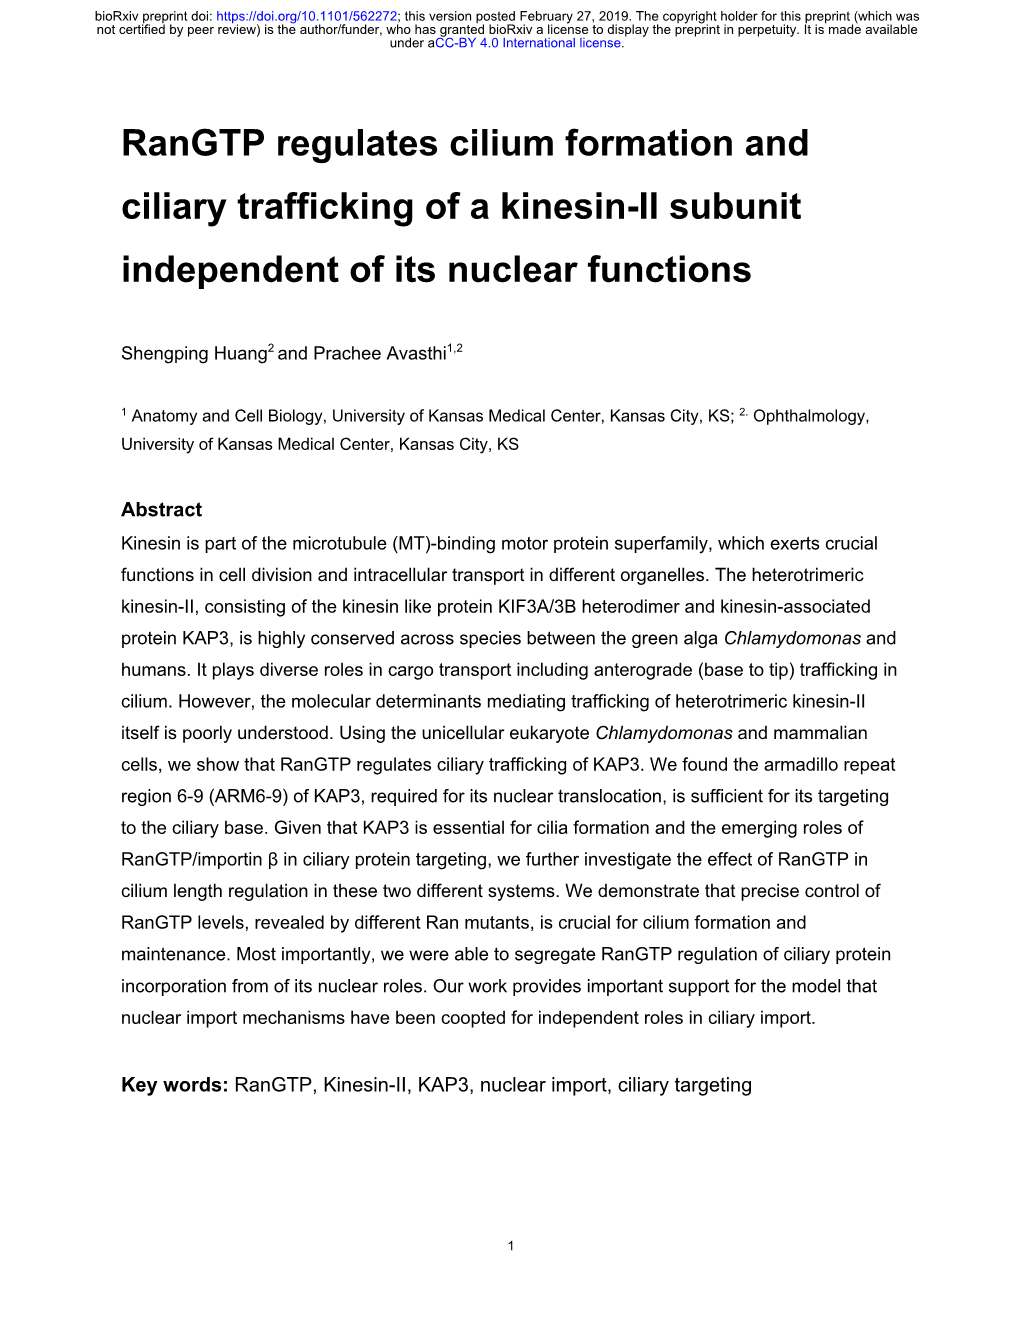 Rangtp Regulates Cilium Formation and Ciliary Trafficking of a Kinesin-II Subunit Independent of Its Nuclear Functions